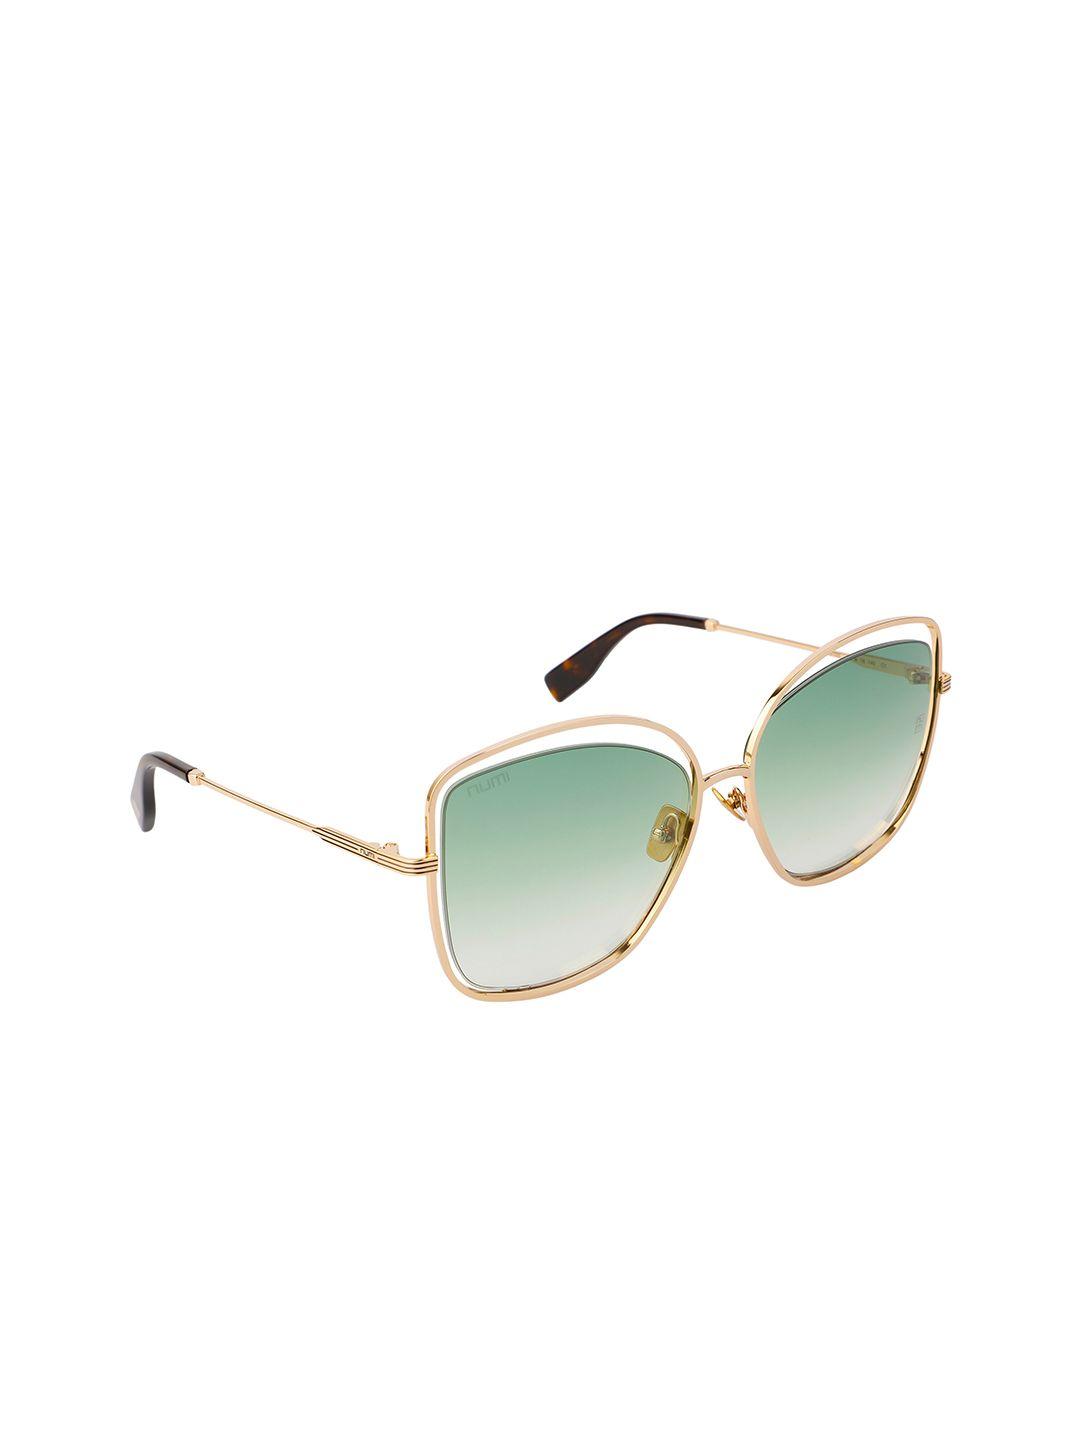 numi women green lens & gold-toned oversized sunglasses - n18133scl1-green